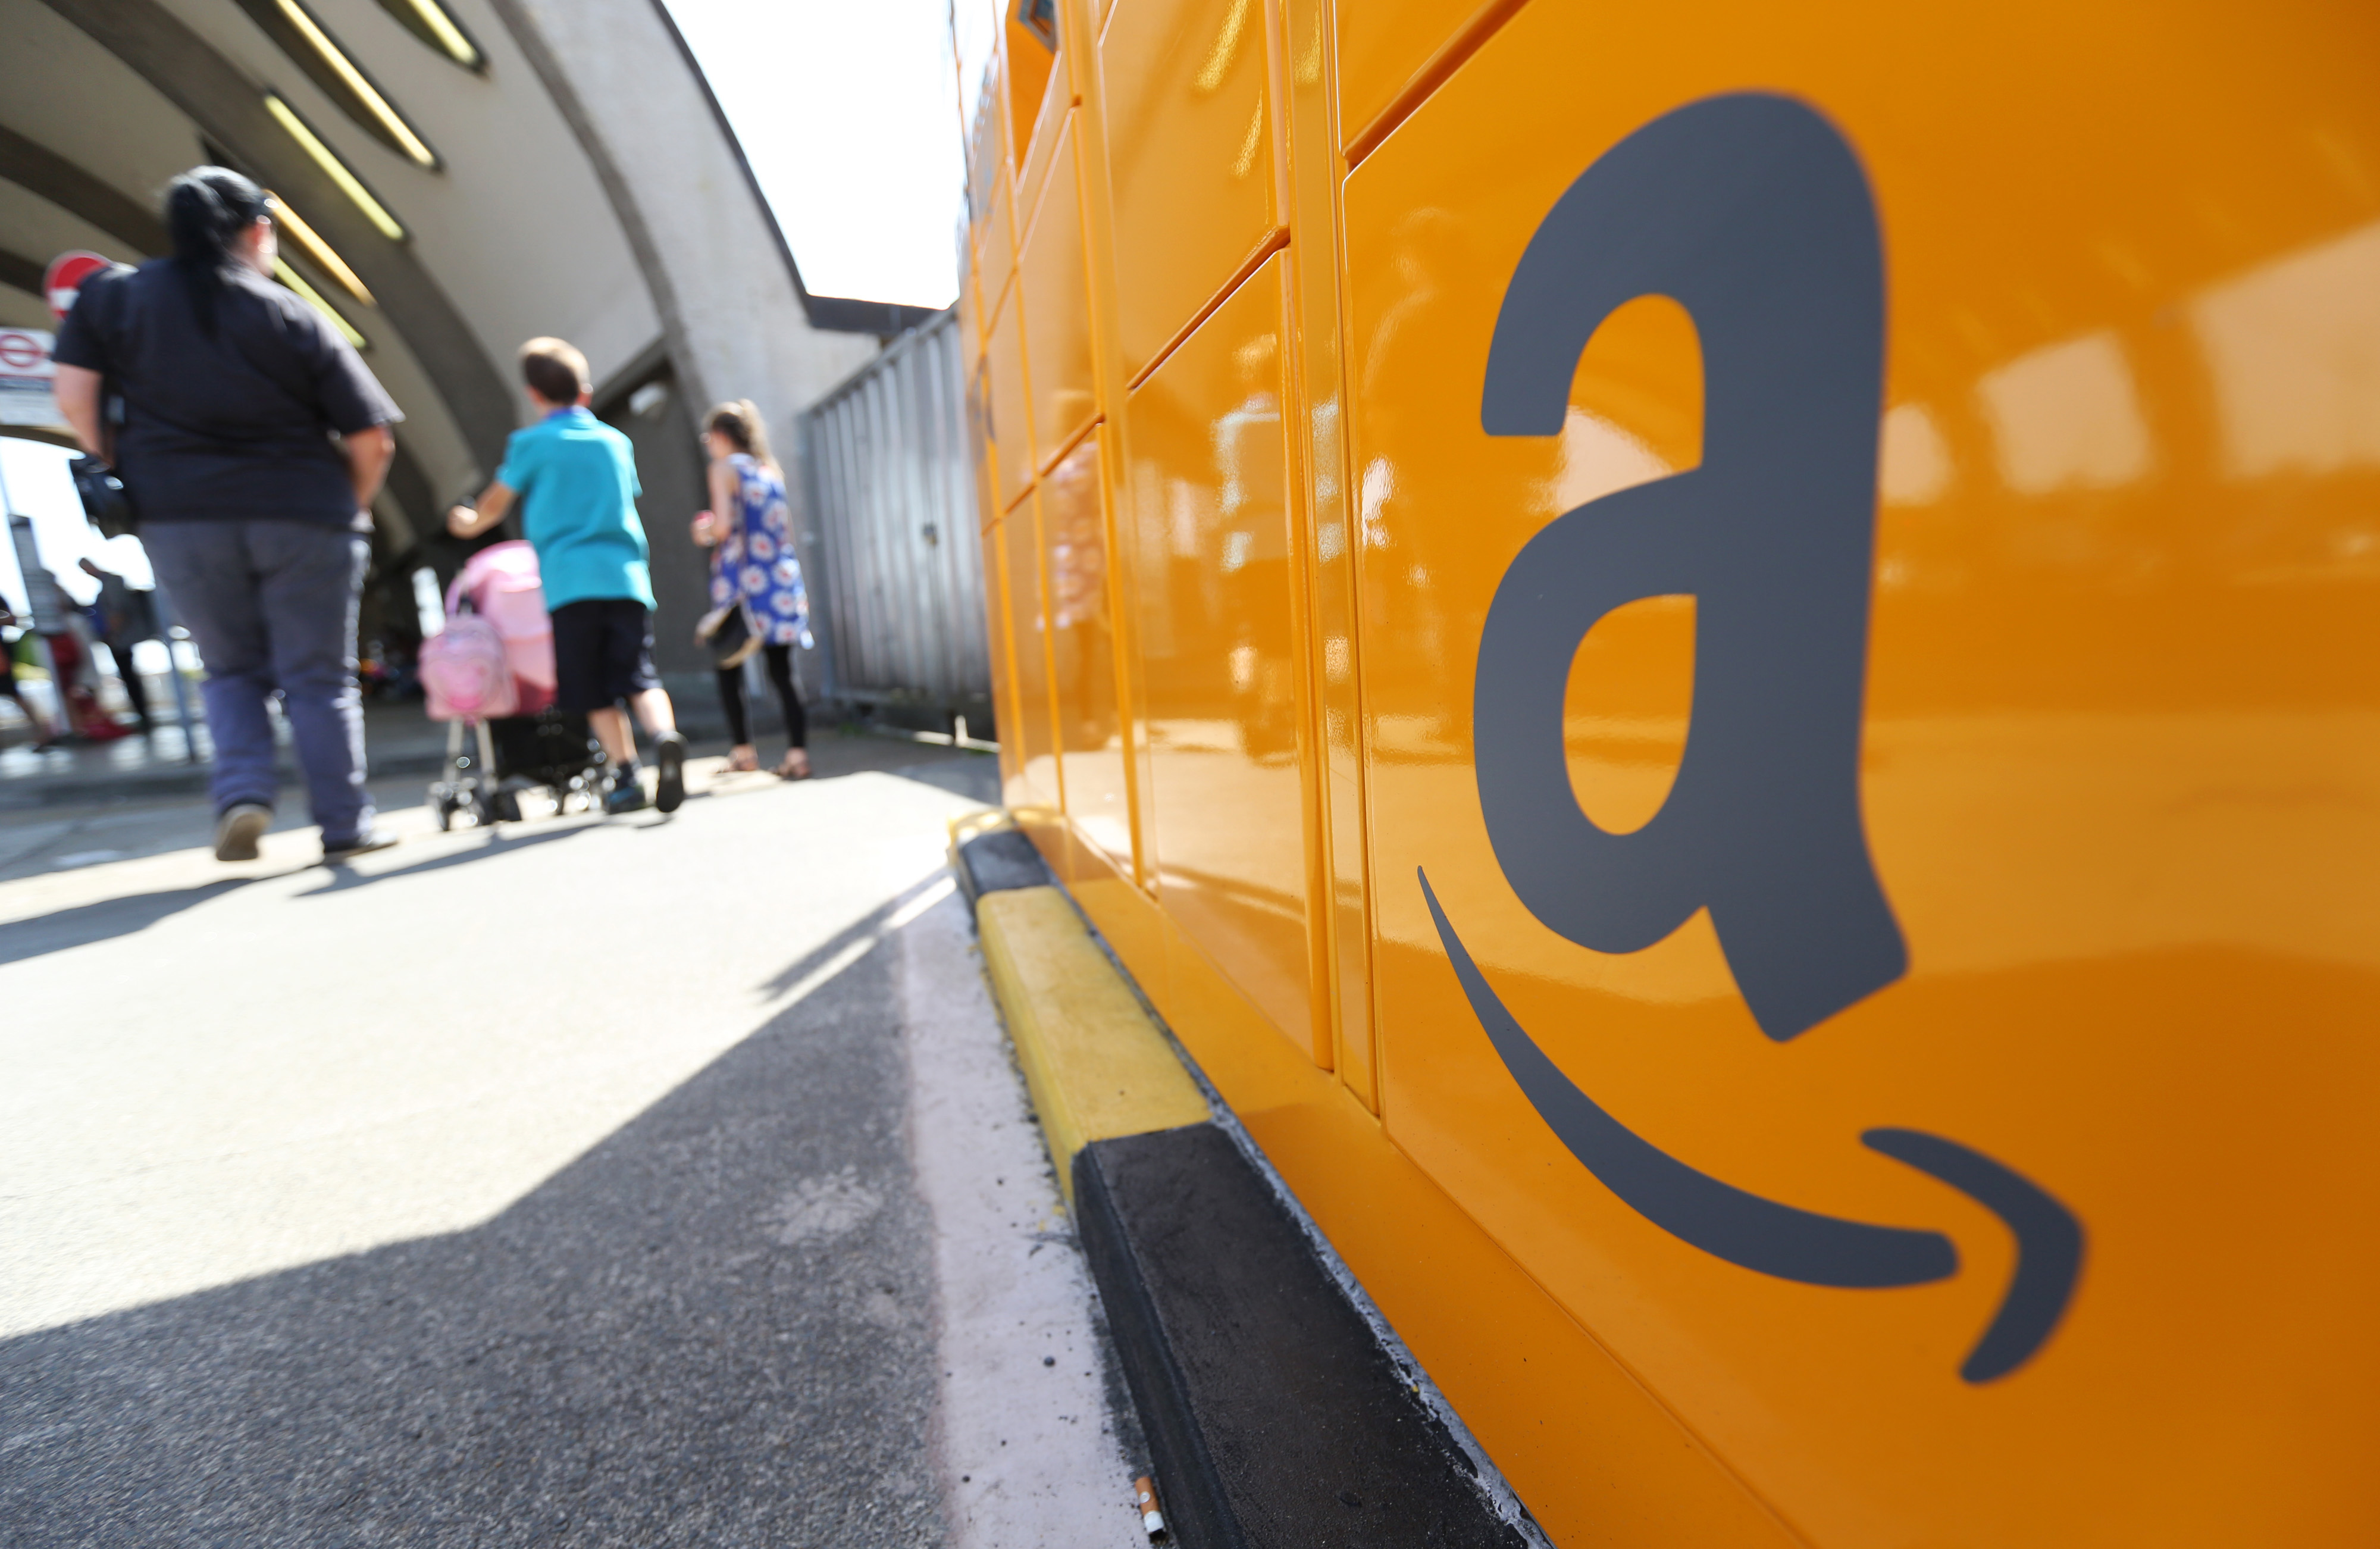 An Amazon.com Inc. pickup and collect locker at Newbury Park railway station in Newbury Park, U.K., on Wednesday, July 23, 2014. (Bloomberg / Getty Images)